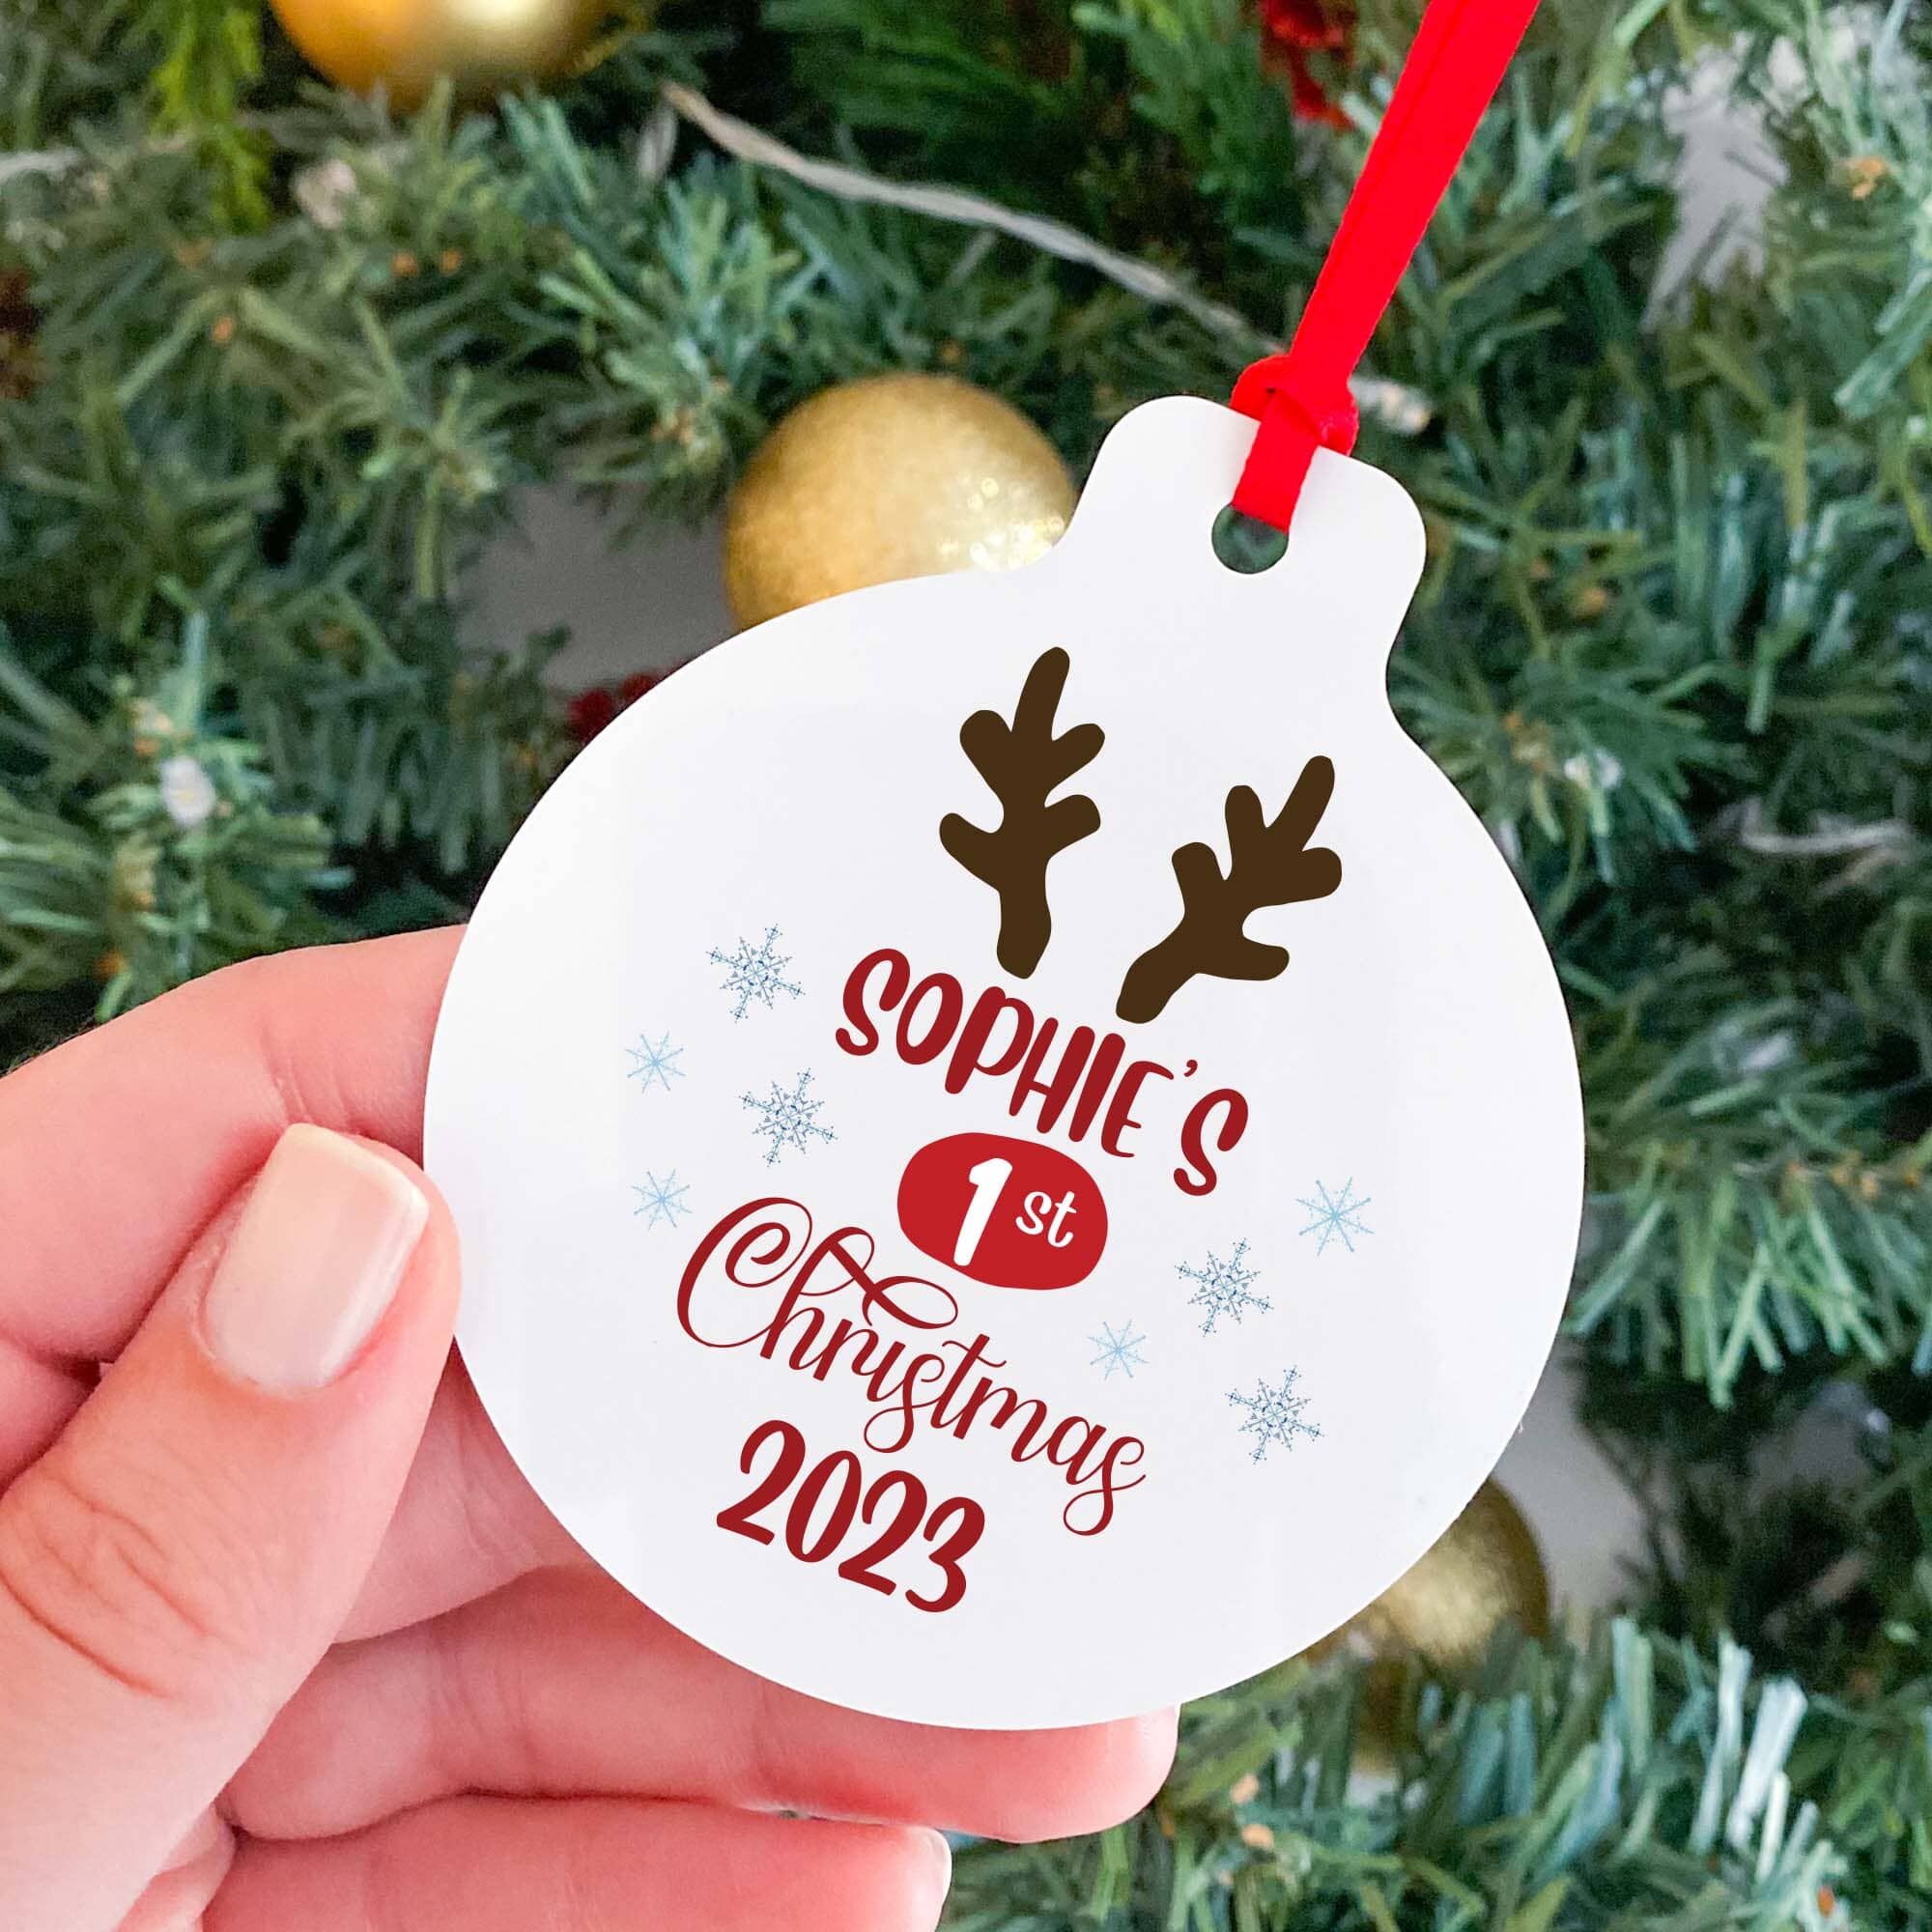 Children's Personalised Christmas Tree Ornament with Name, Flat Metal Bauble, Baby Kids First Xmas Keepsake